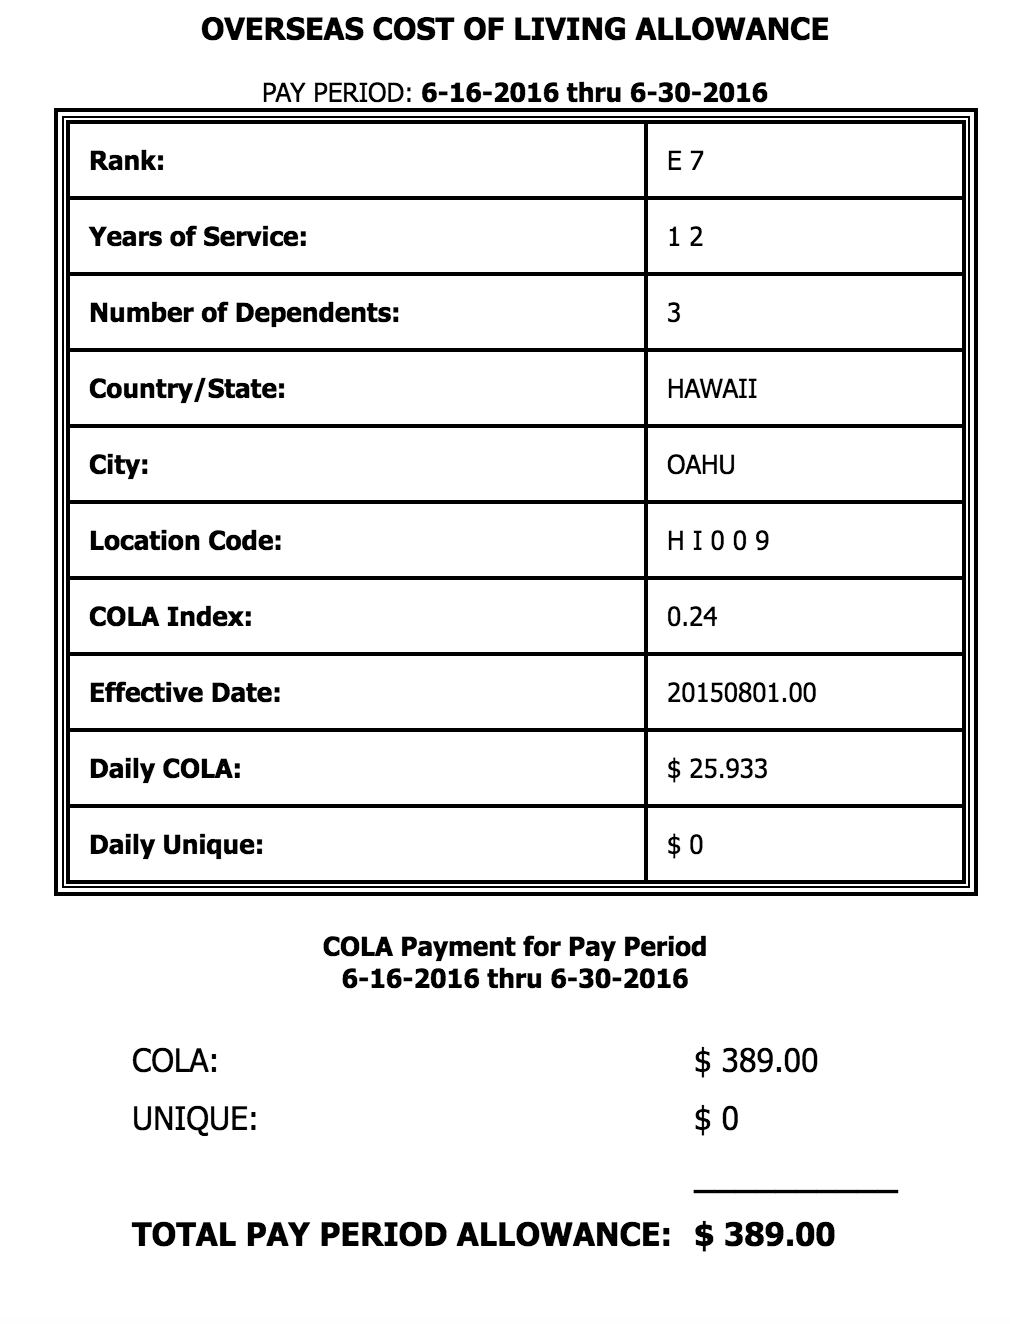 Hawaii TLA, BAH, and COLA Rates for 2017